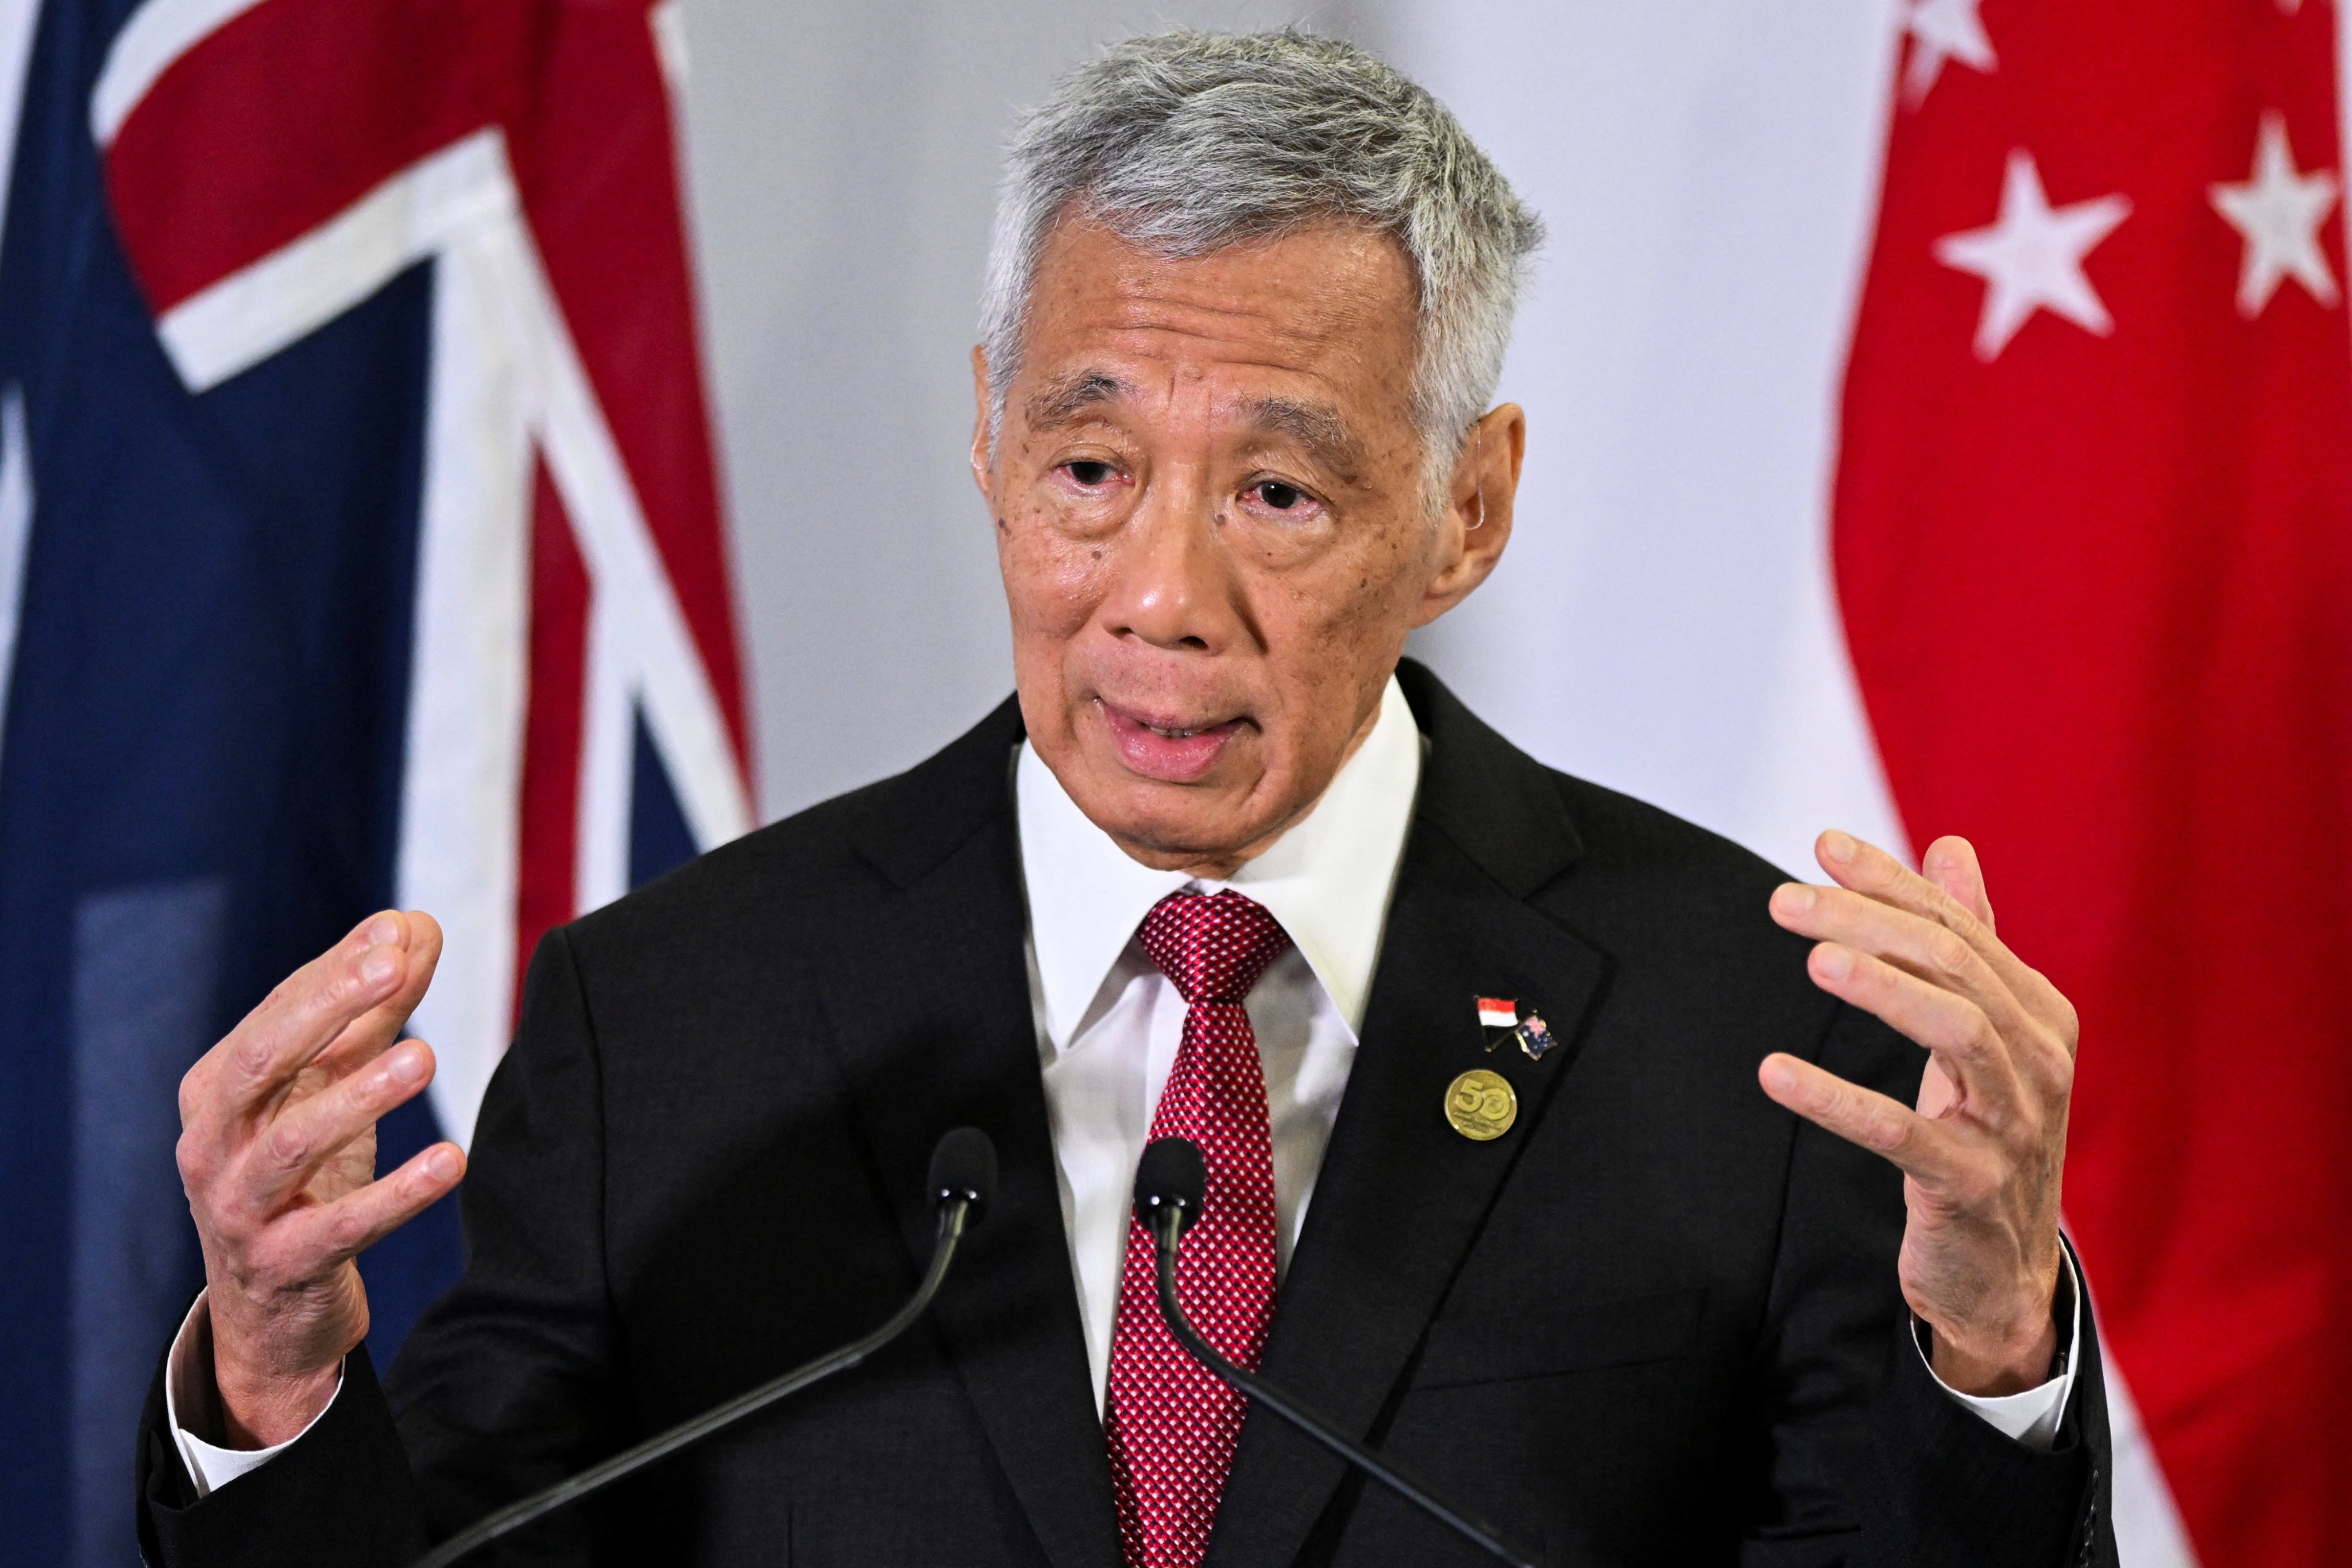 Singapore’s Prime Minister Lee Hsien Loong speaks at a press conference in Australia on March 5. Photo: Reuters